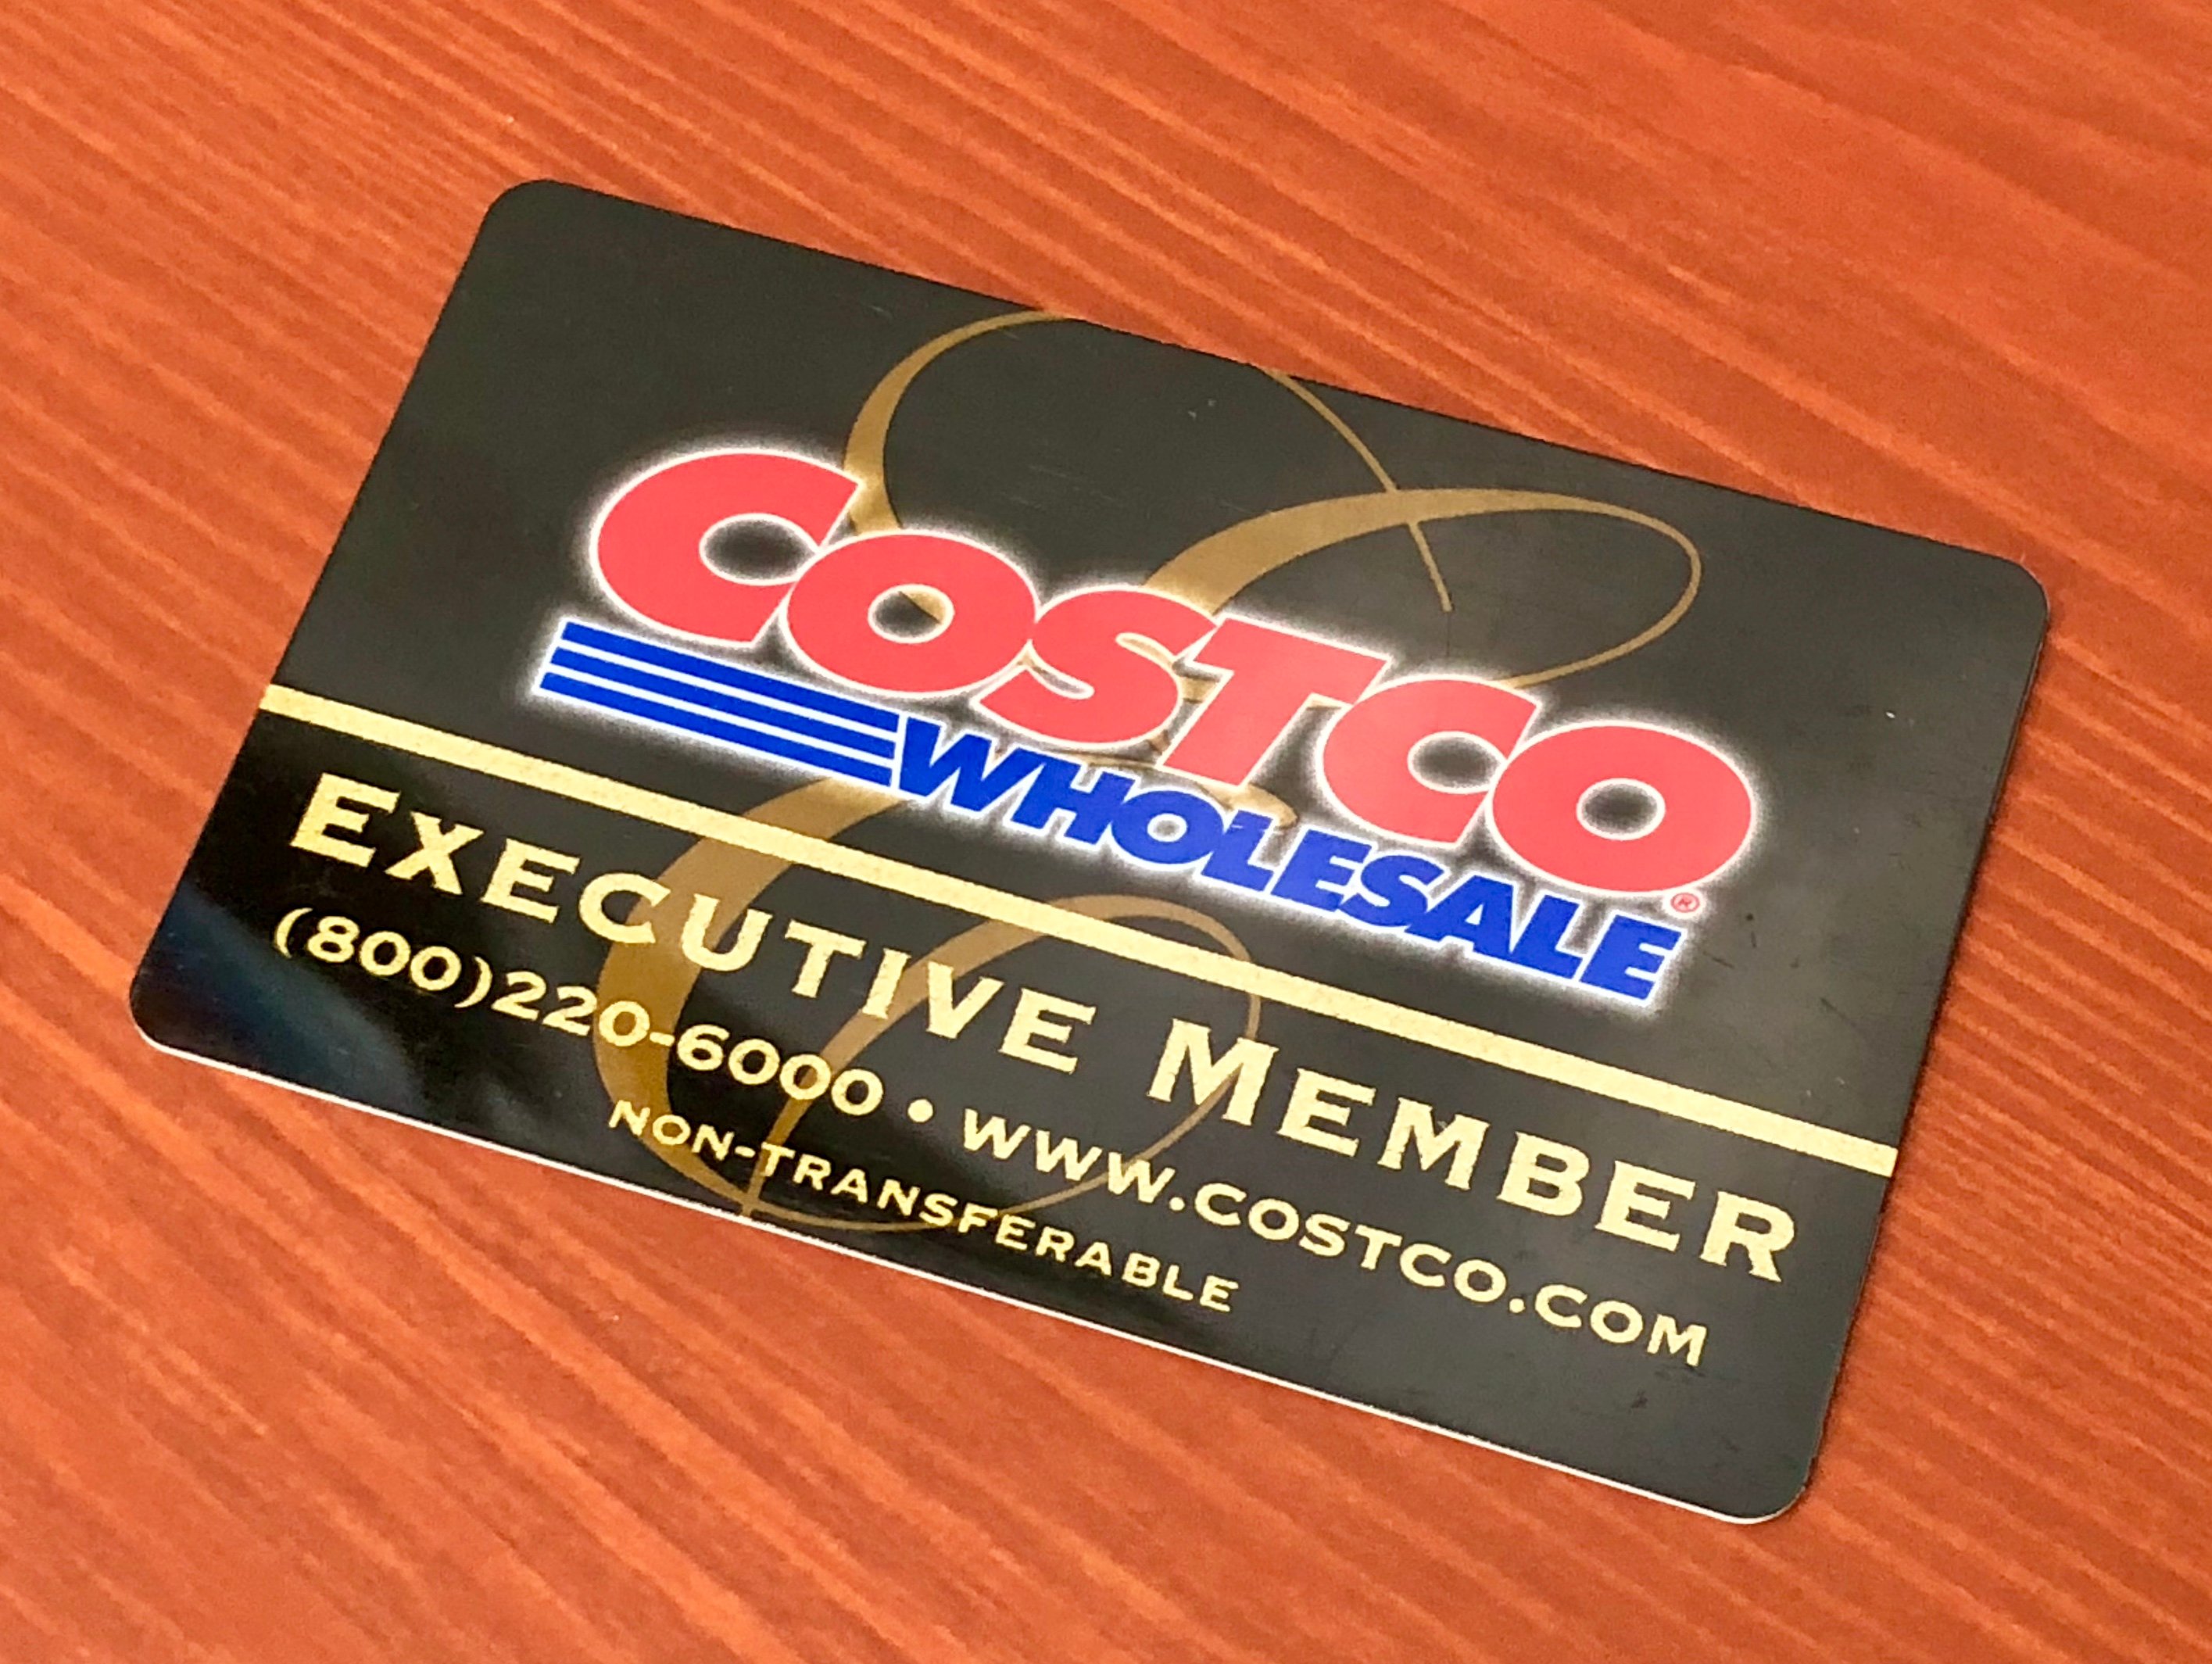 Here are the reasons to join Costco and reasons you should skip the membership.